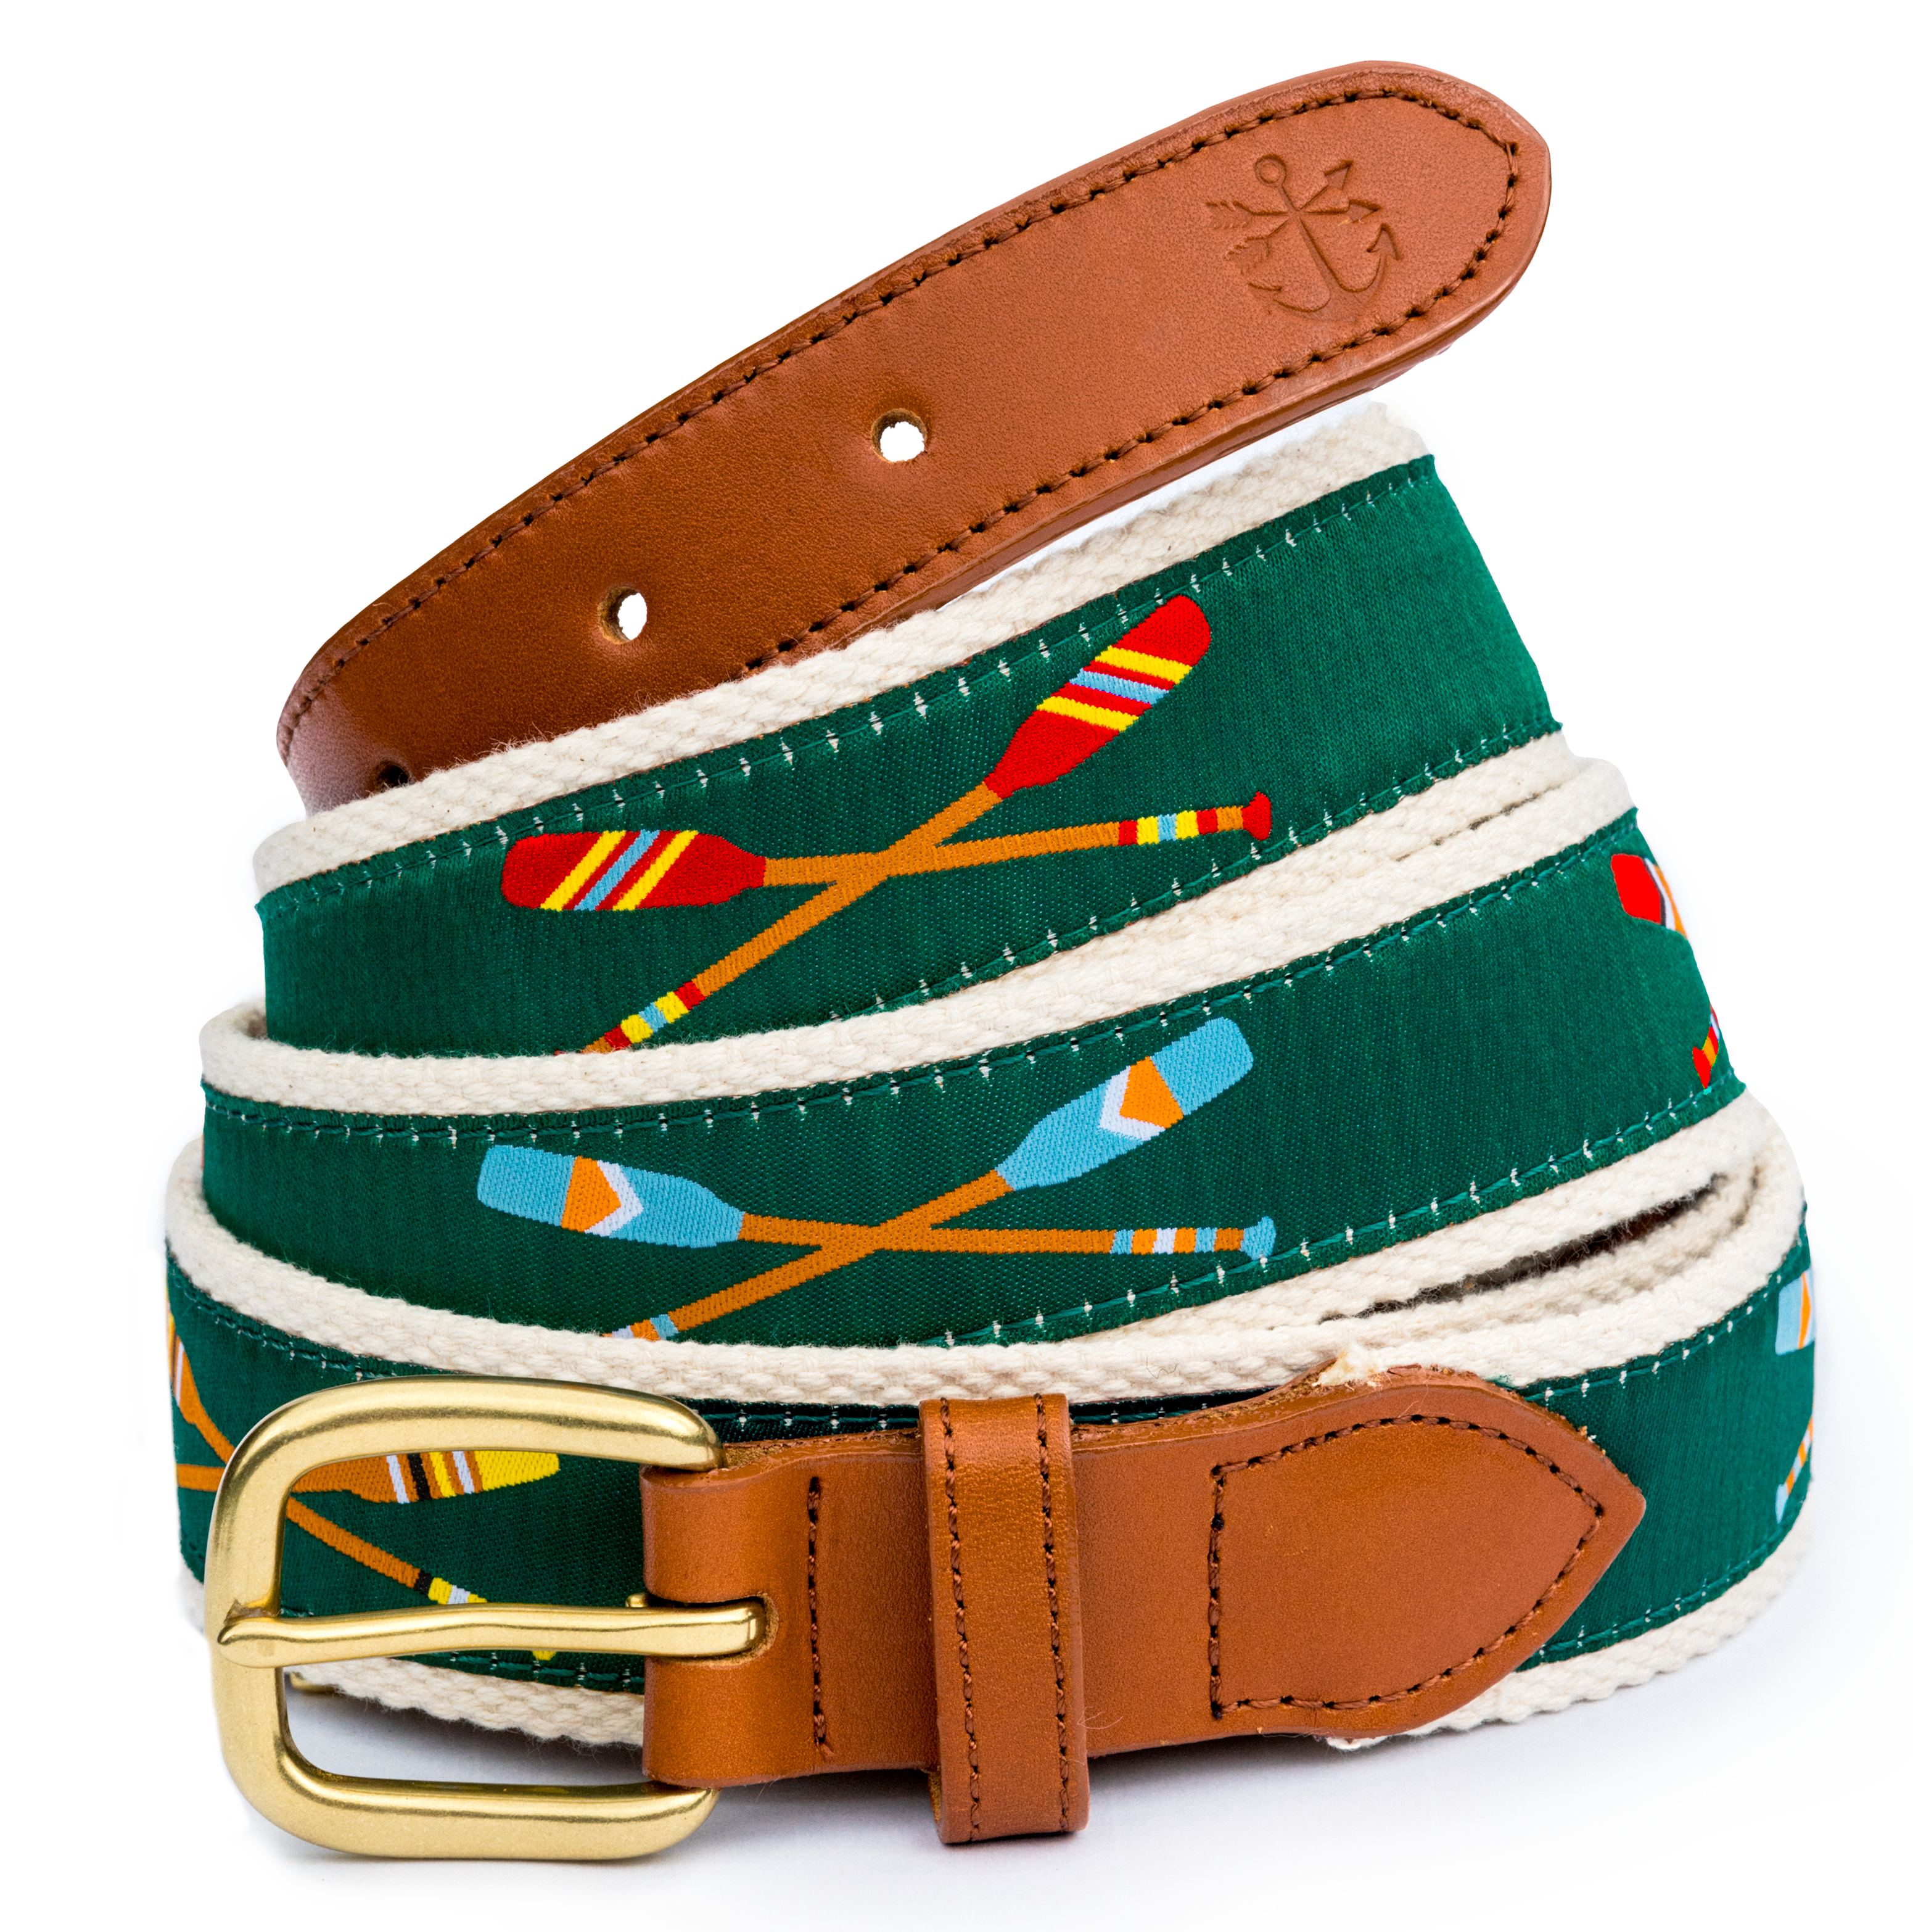 The PEARLFECT Big Buckle Belt